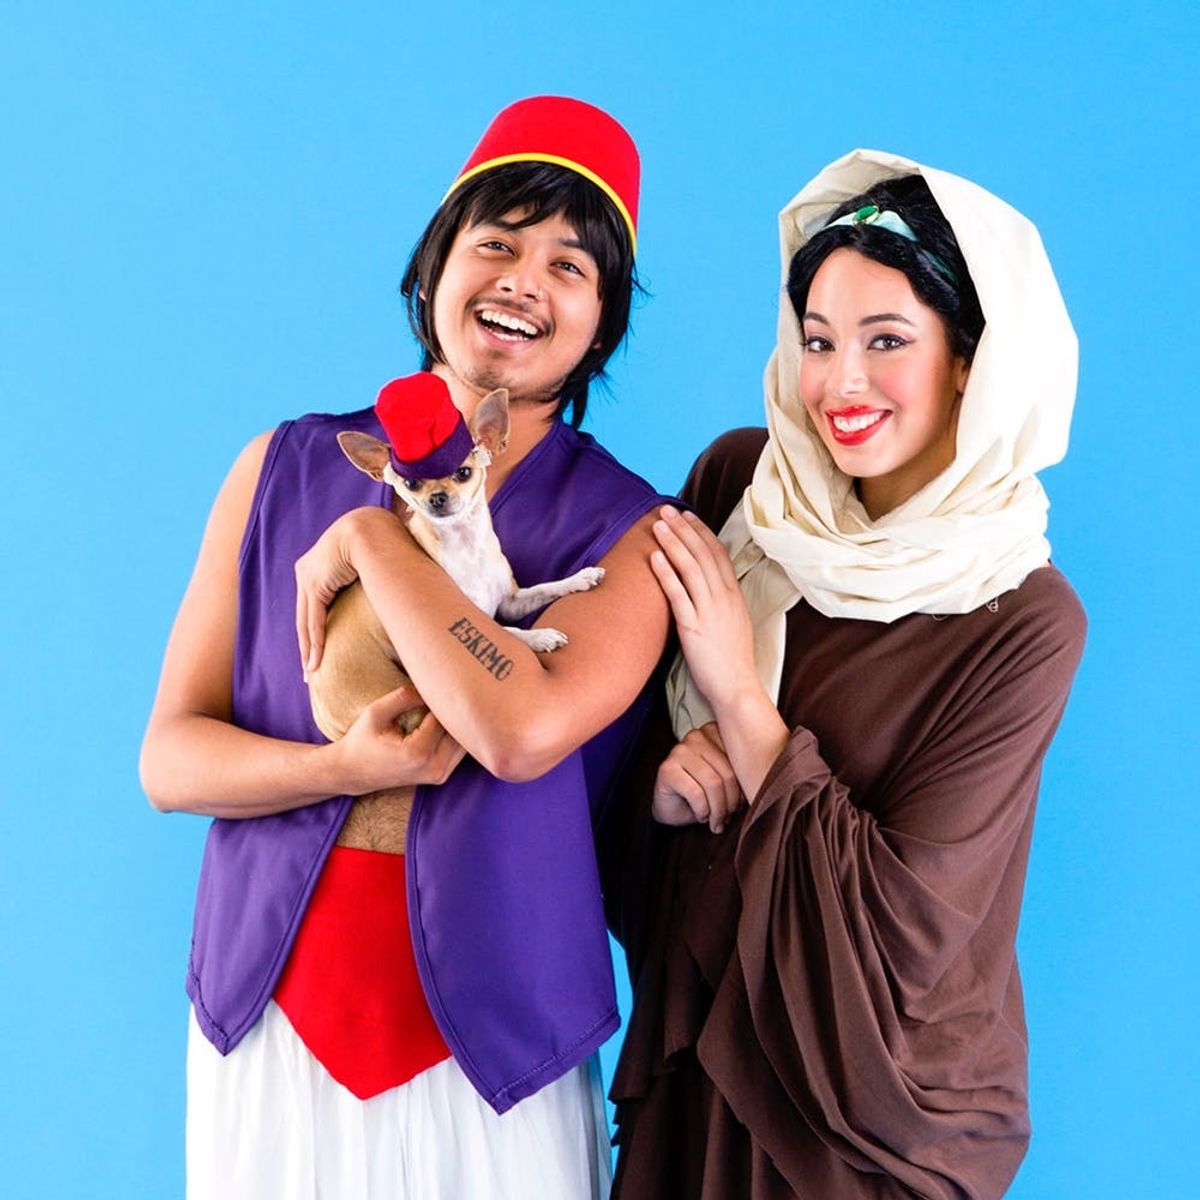 Grab Your BAEs and Explore the World Together in These Jasmine, Aladdin and Abu Costumes